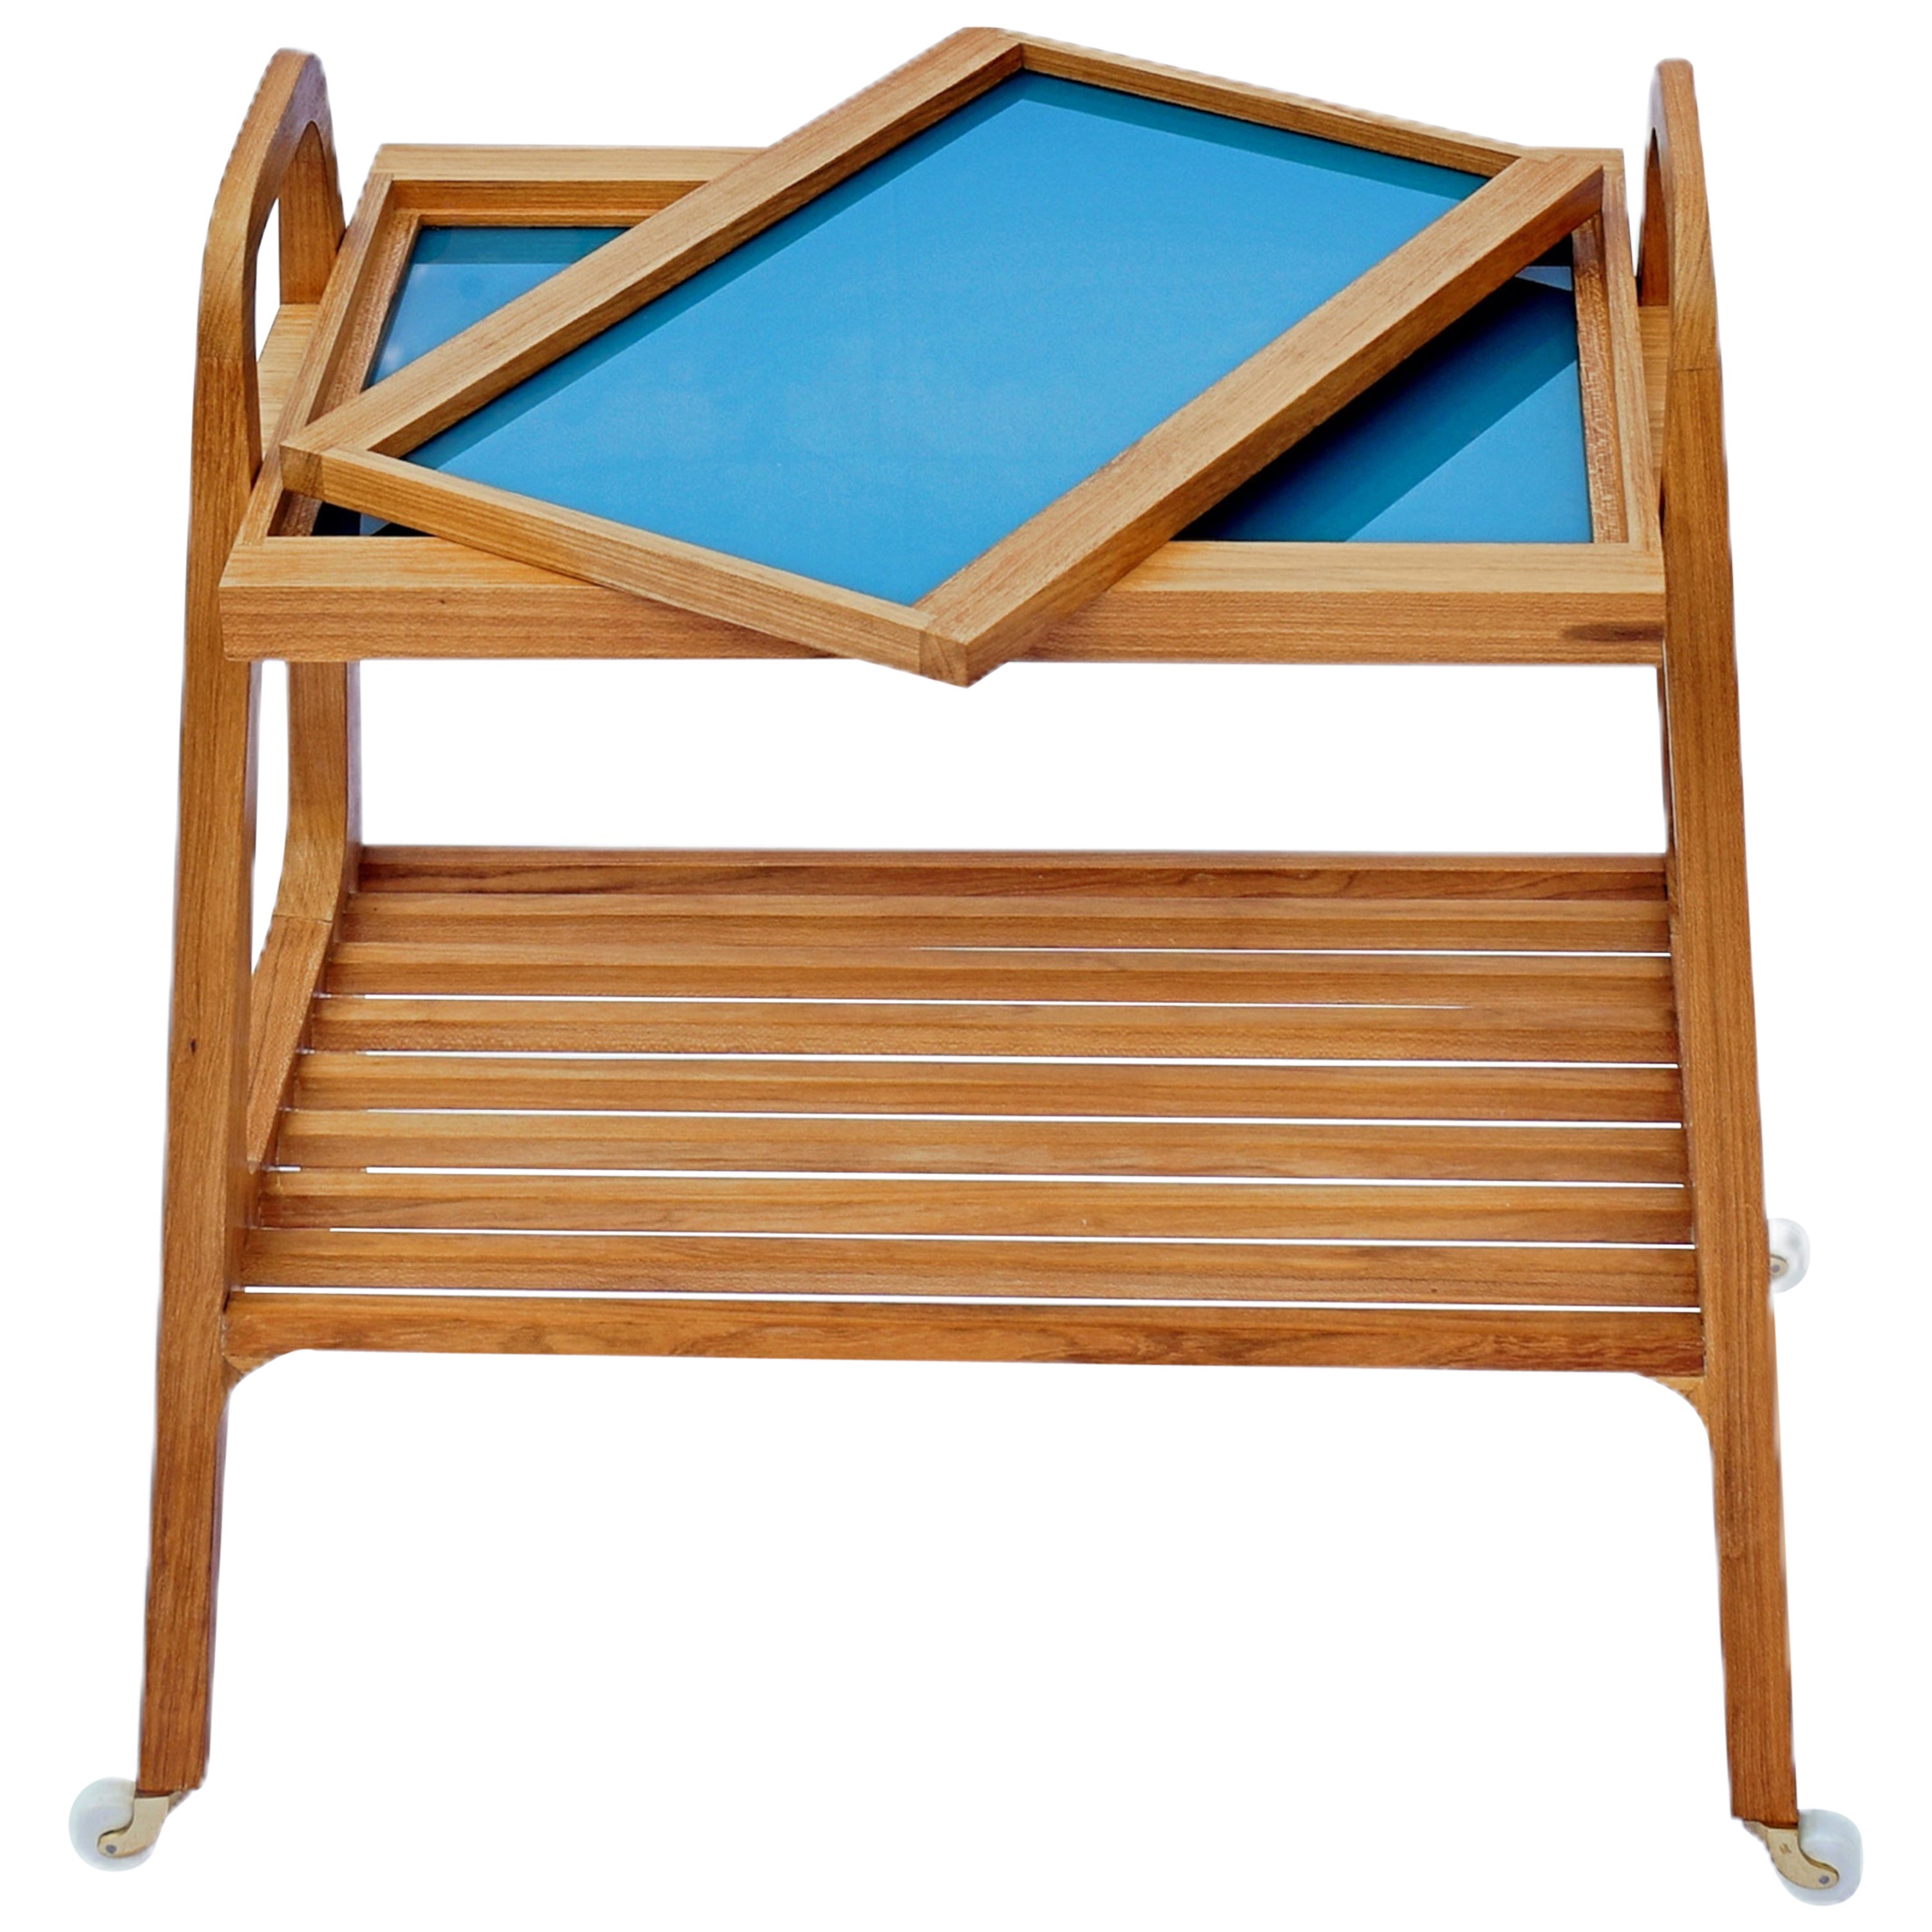 SOFO Tea Trolley in Freijo Wood with Blue Glass Tray For Sale